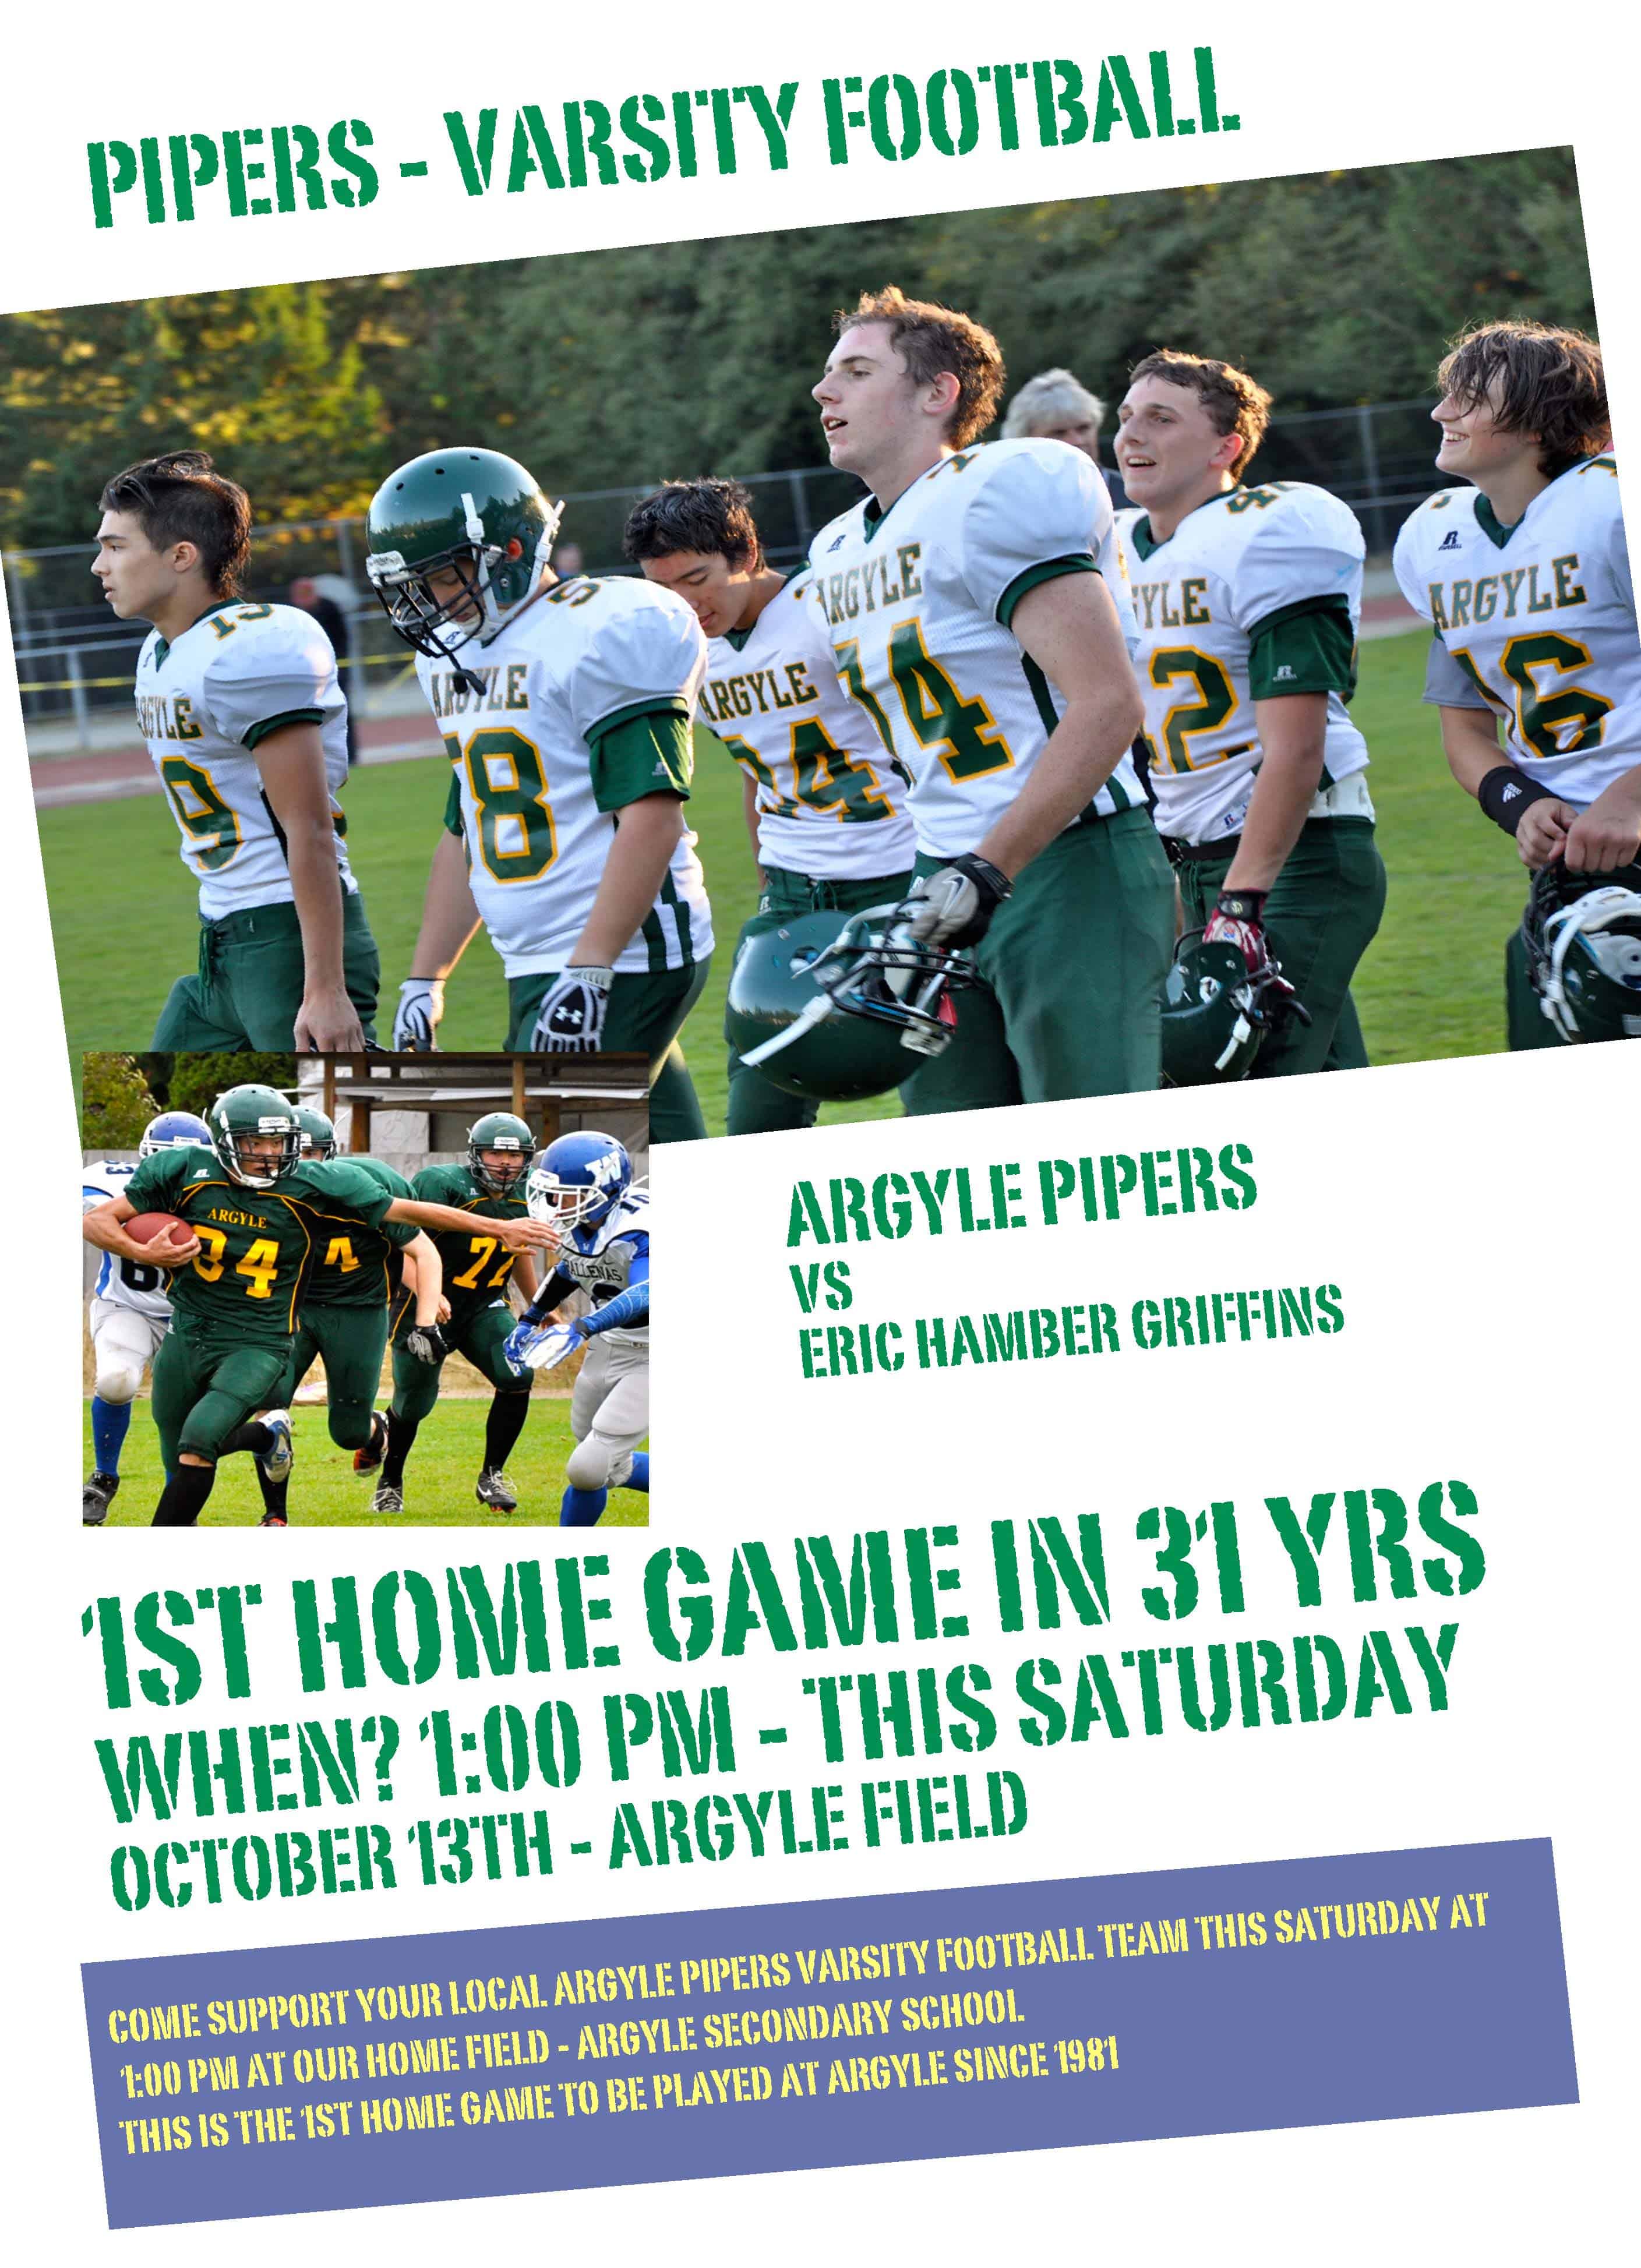 Argyle Pipers football team re-christens home field